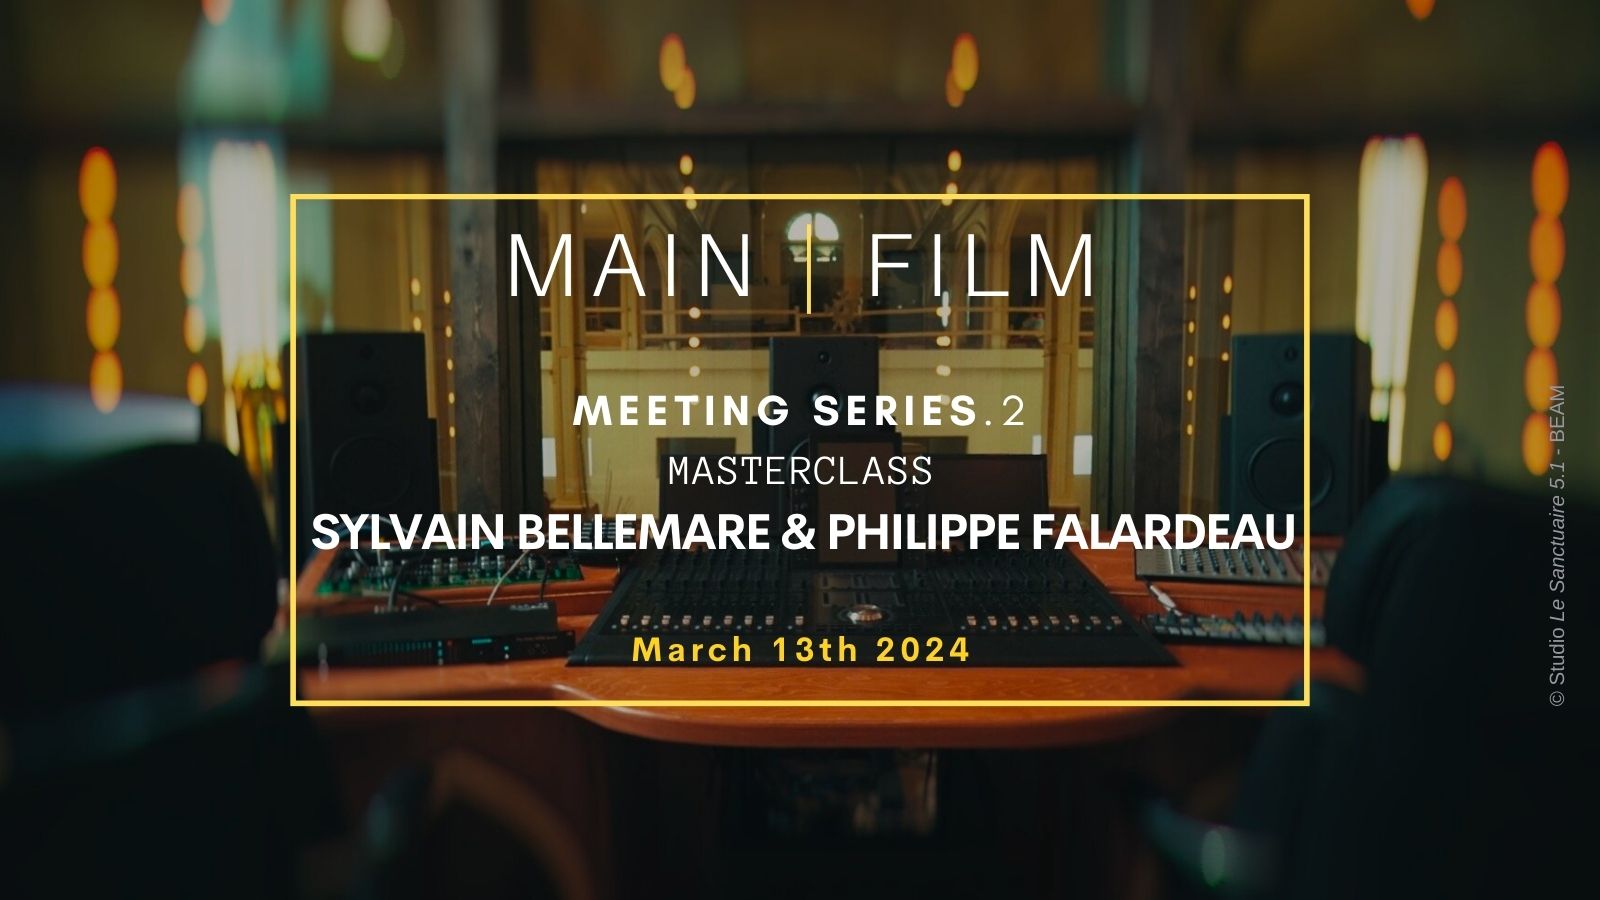 Meeting Series : Masterclass with Sylvain Bellemare & Philippe Falardeau